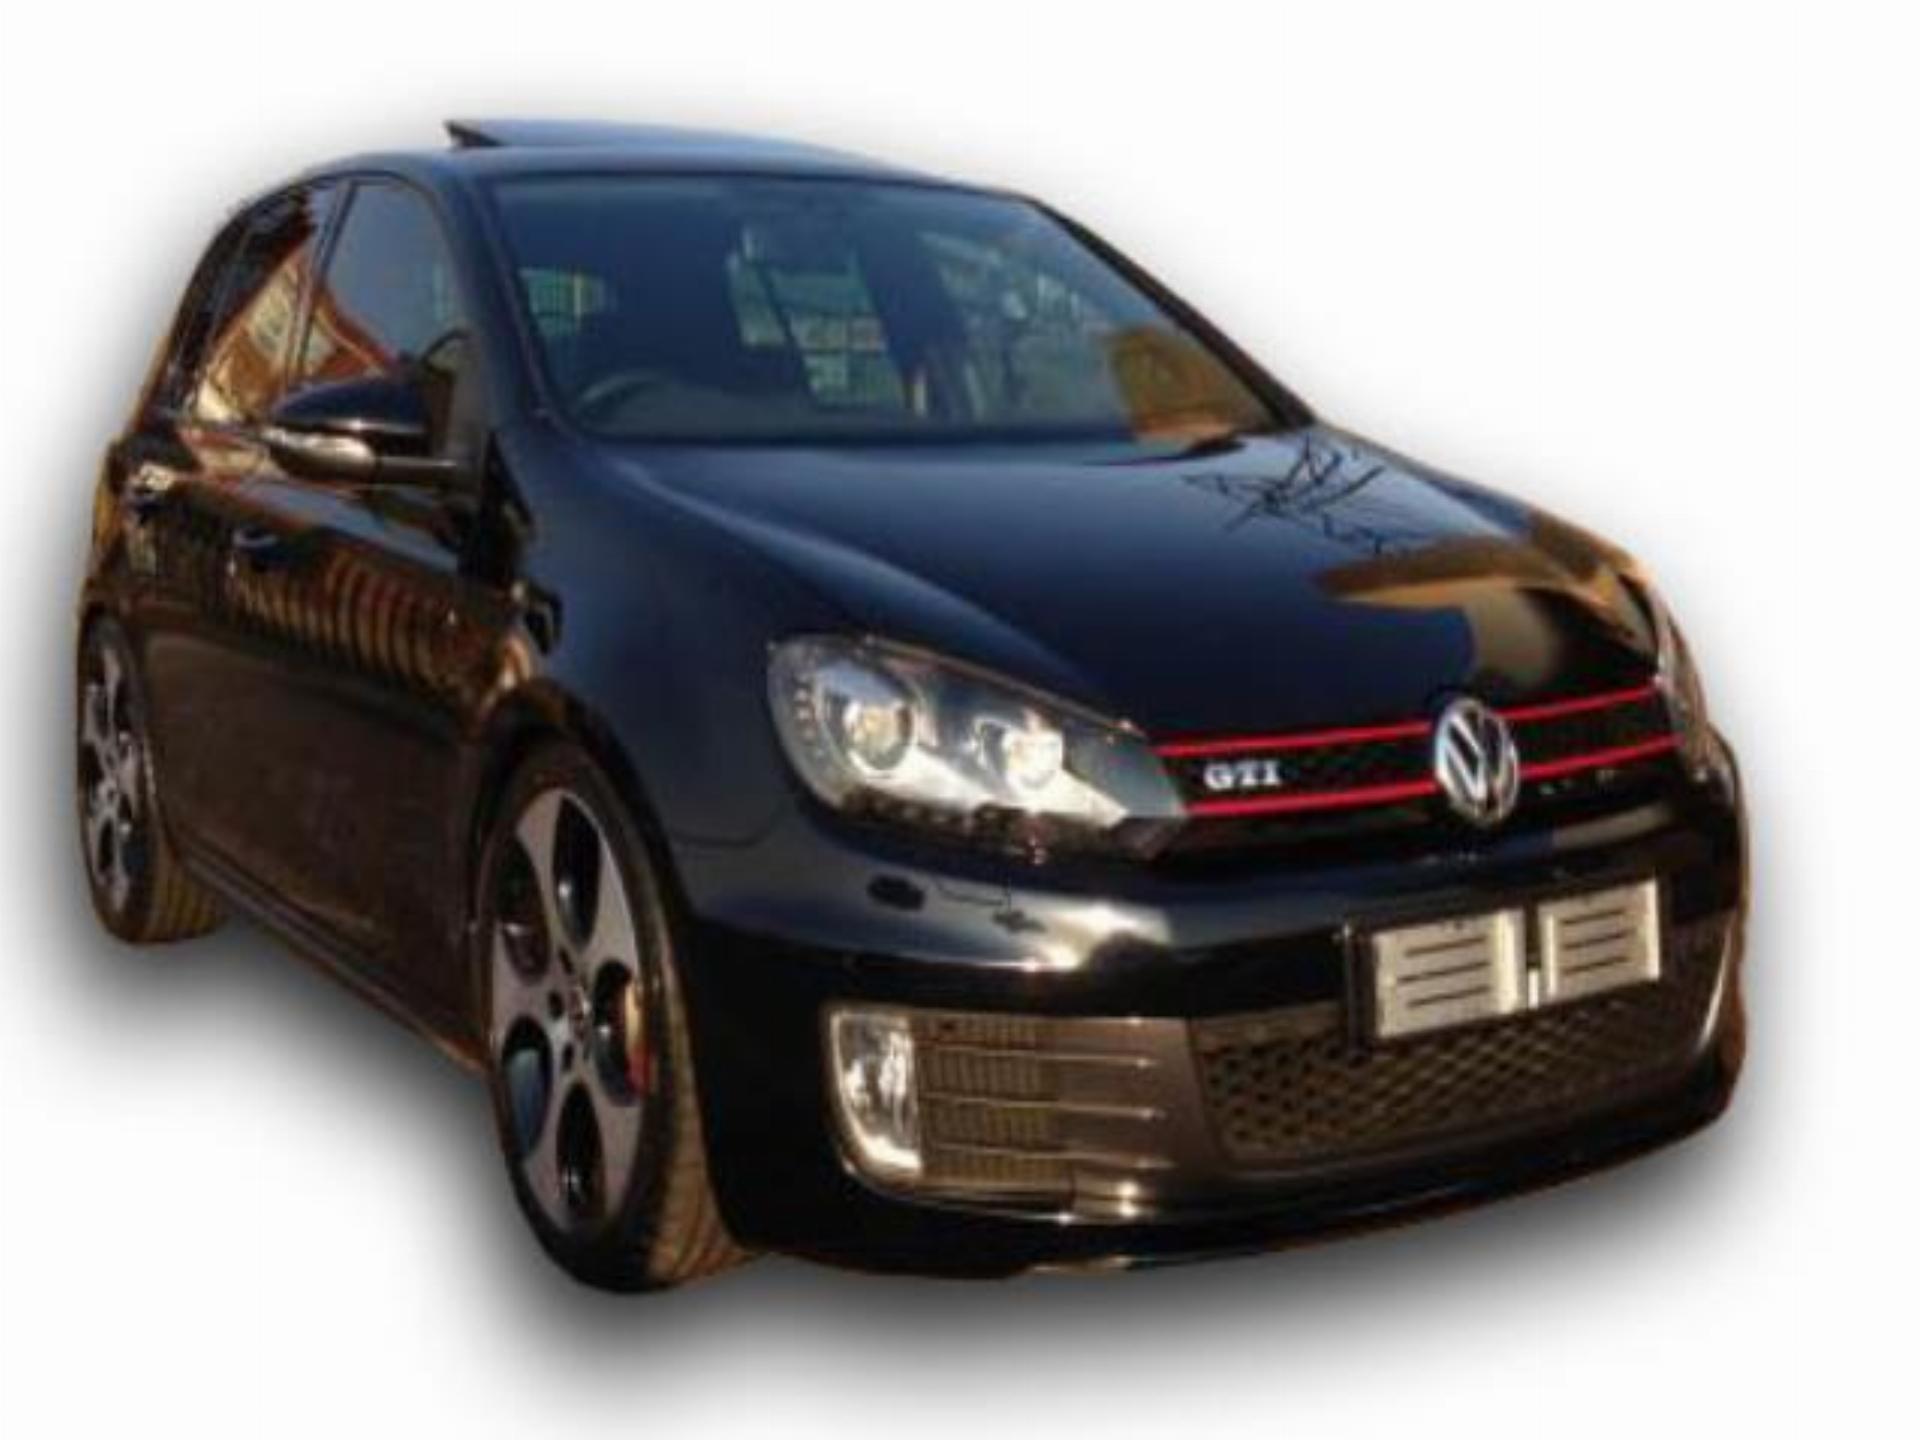 Used VW Golf 6 2.0 Gti DSG 2012 on auction PV1005460